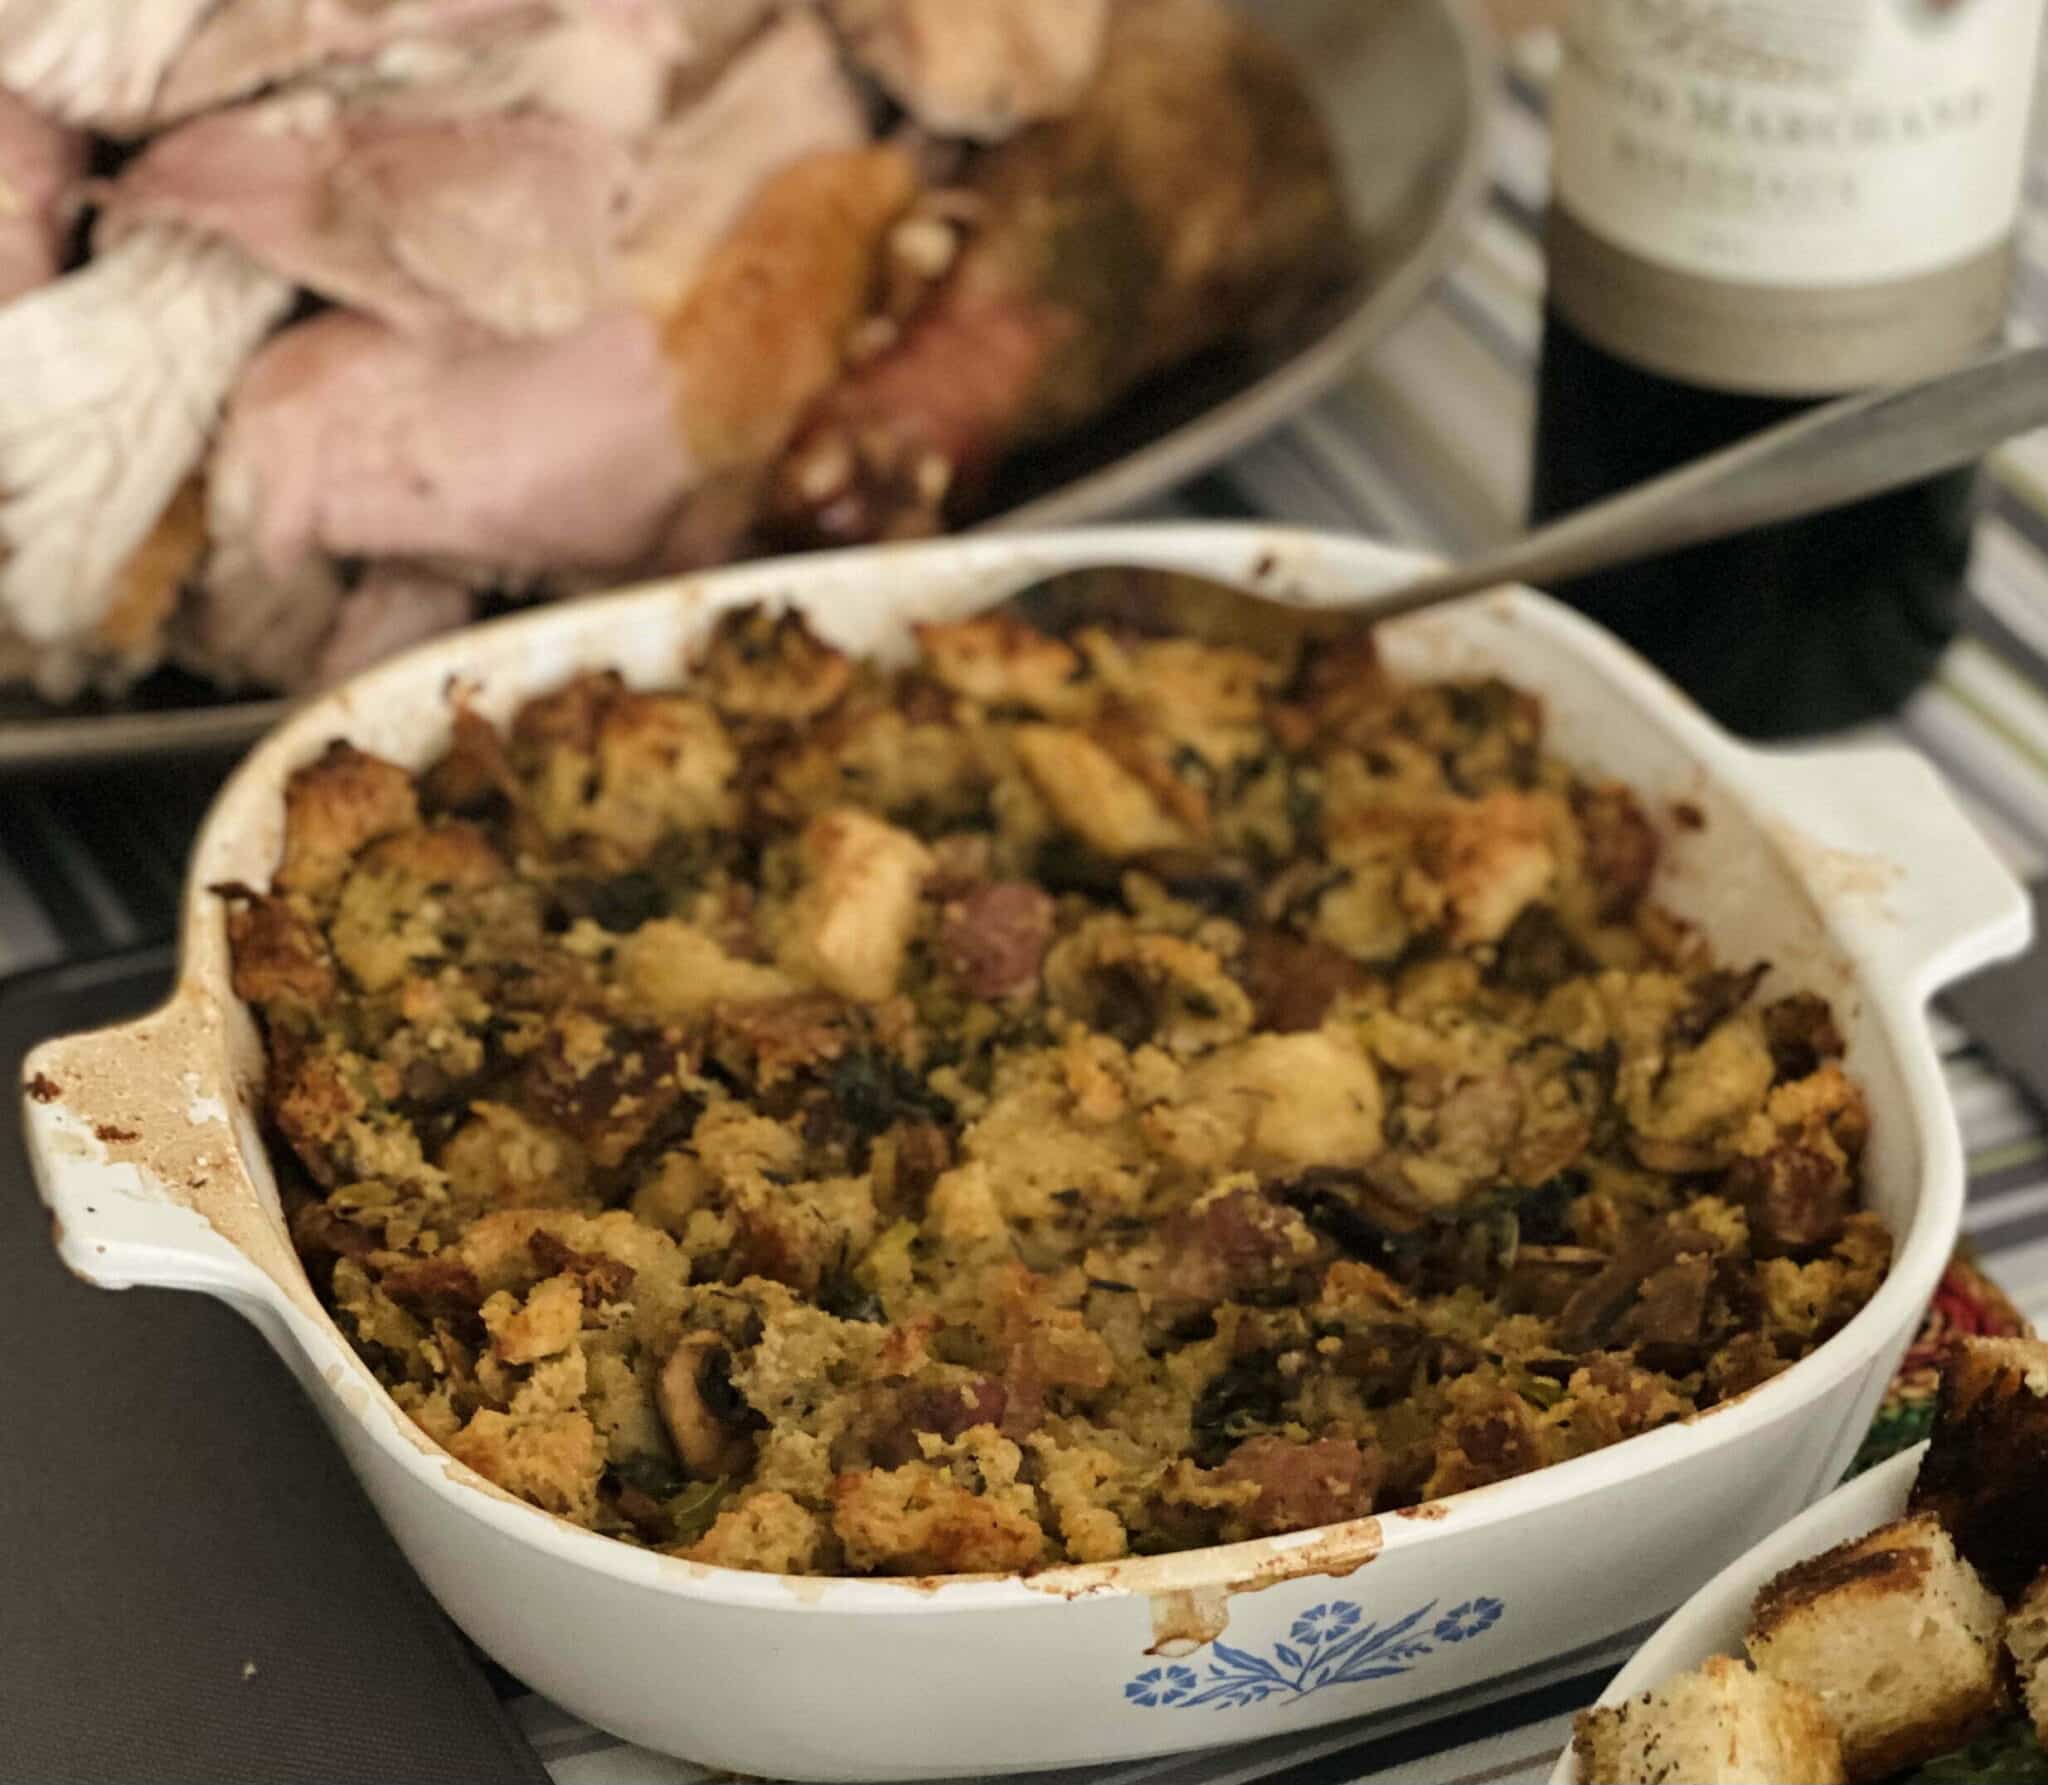 Thanksgiving Stuffing with Sausage and Mushrooms finished